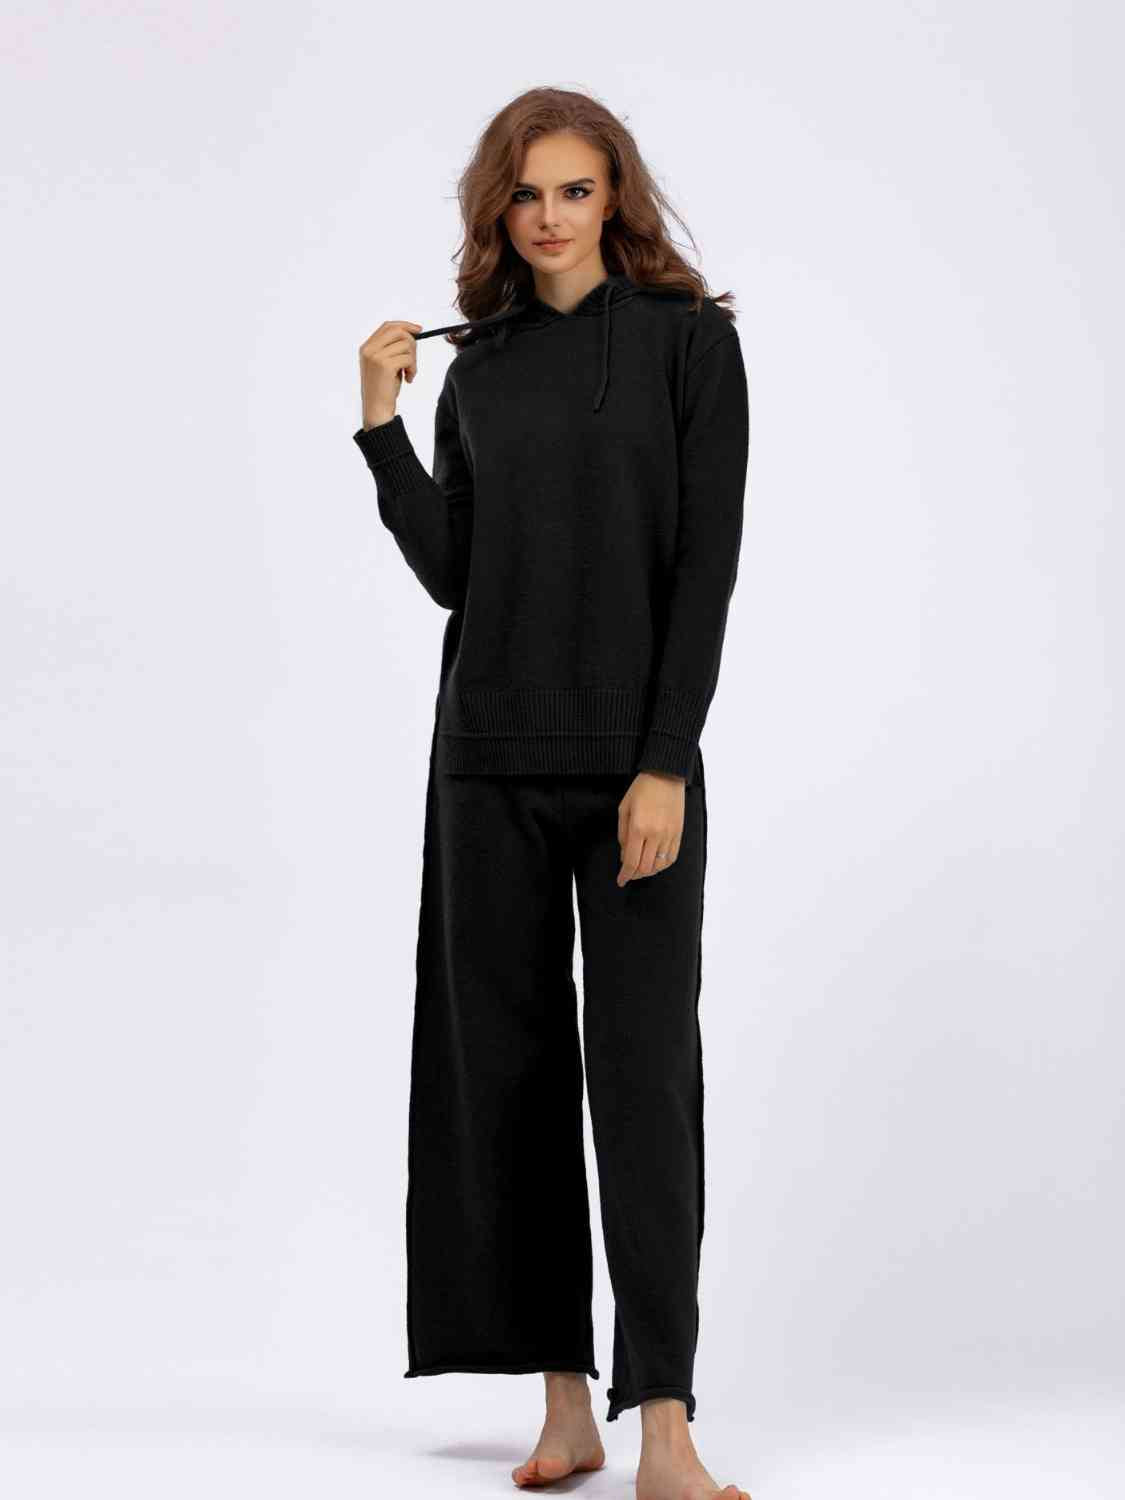 Women's Long Sleeve Hooded Sweater and Knit Pants Set